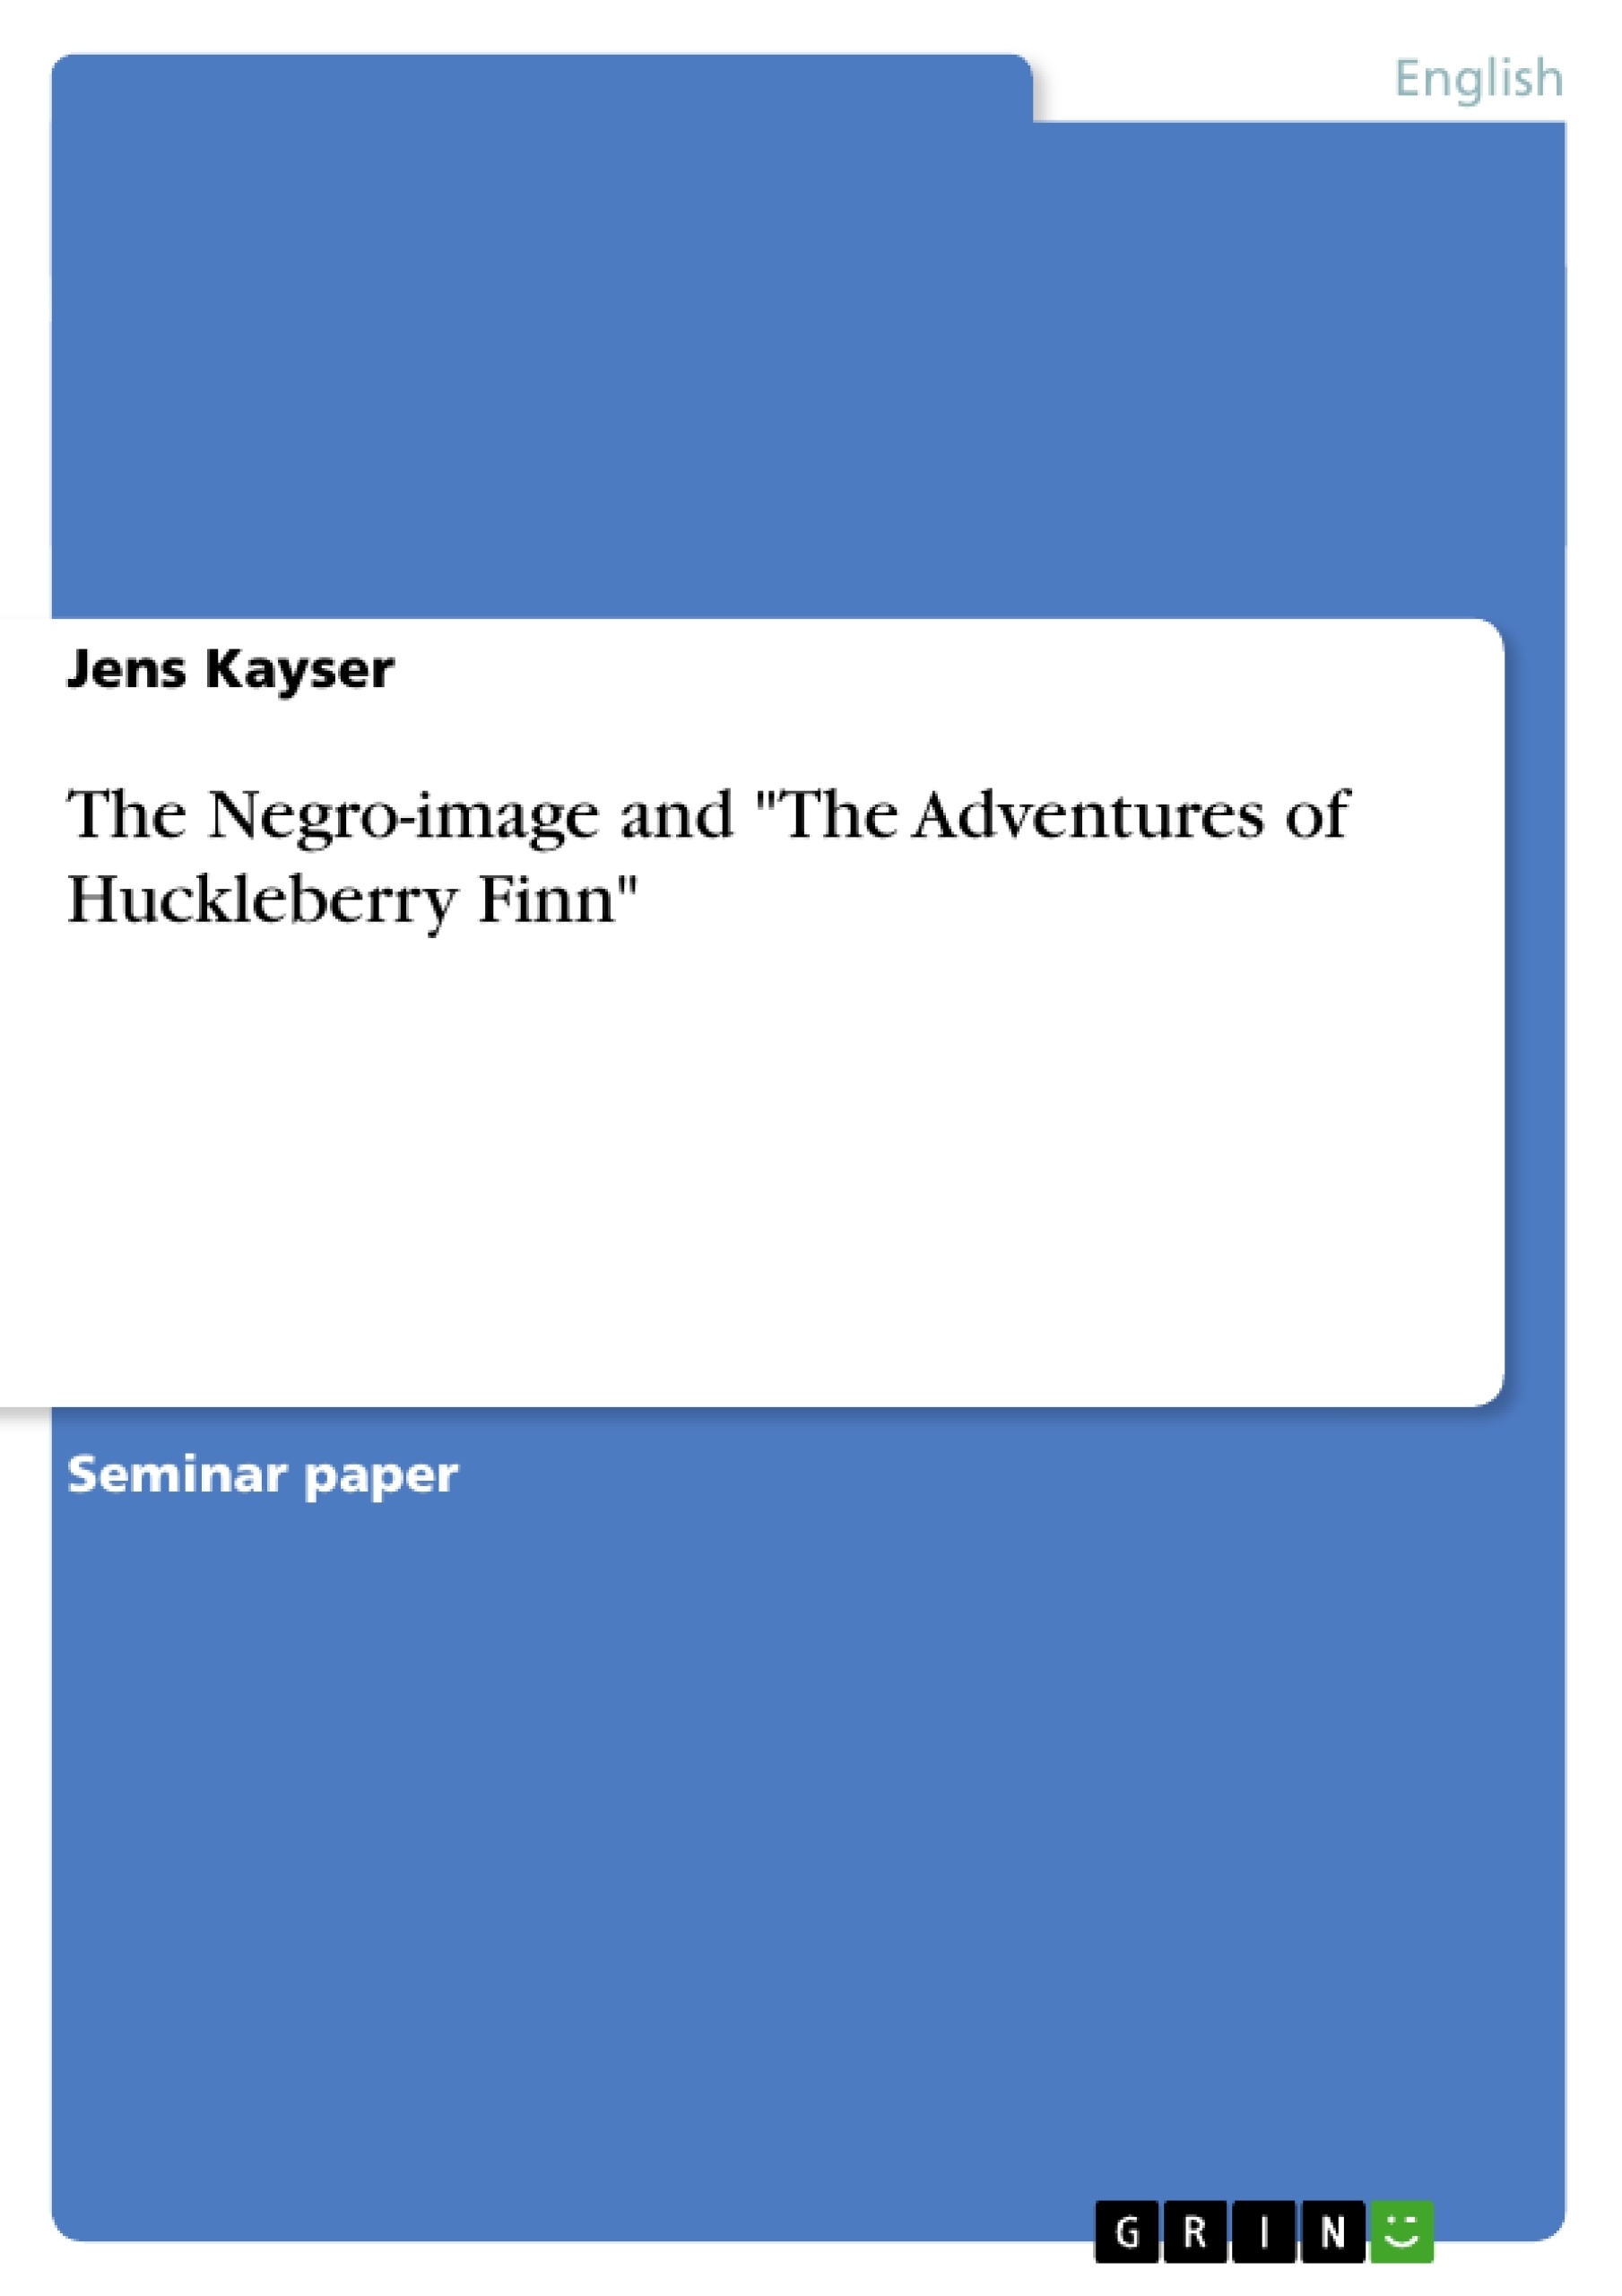 Titel: The Negro-image and "The Adventures of Huckleberry Finn"